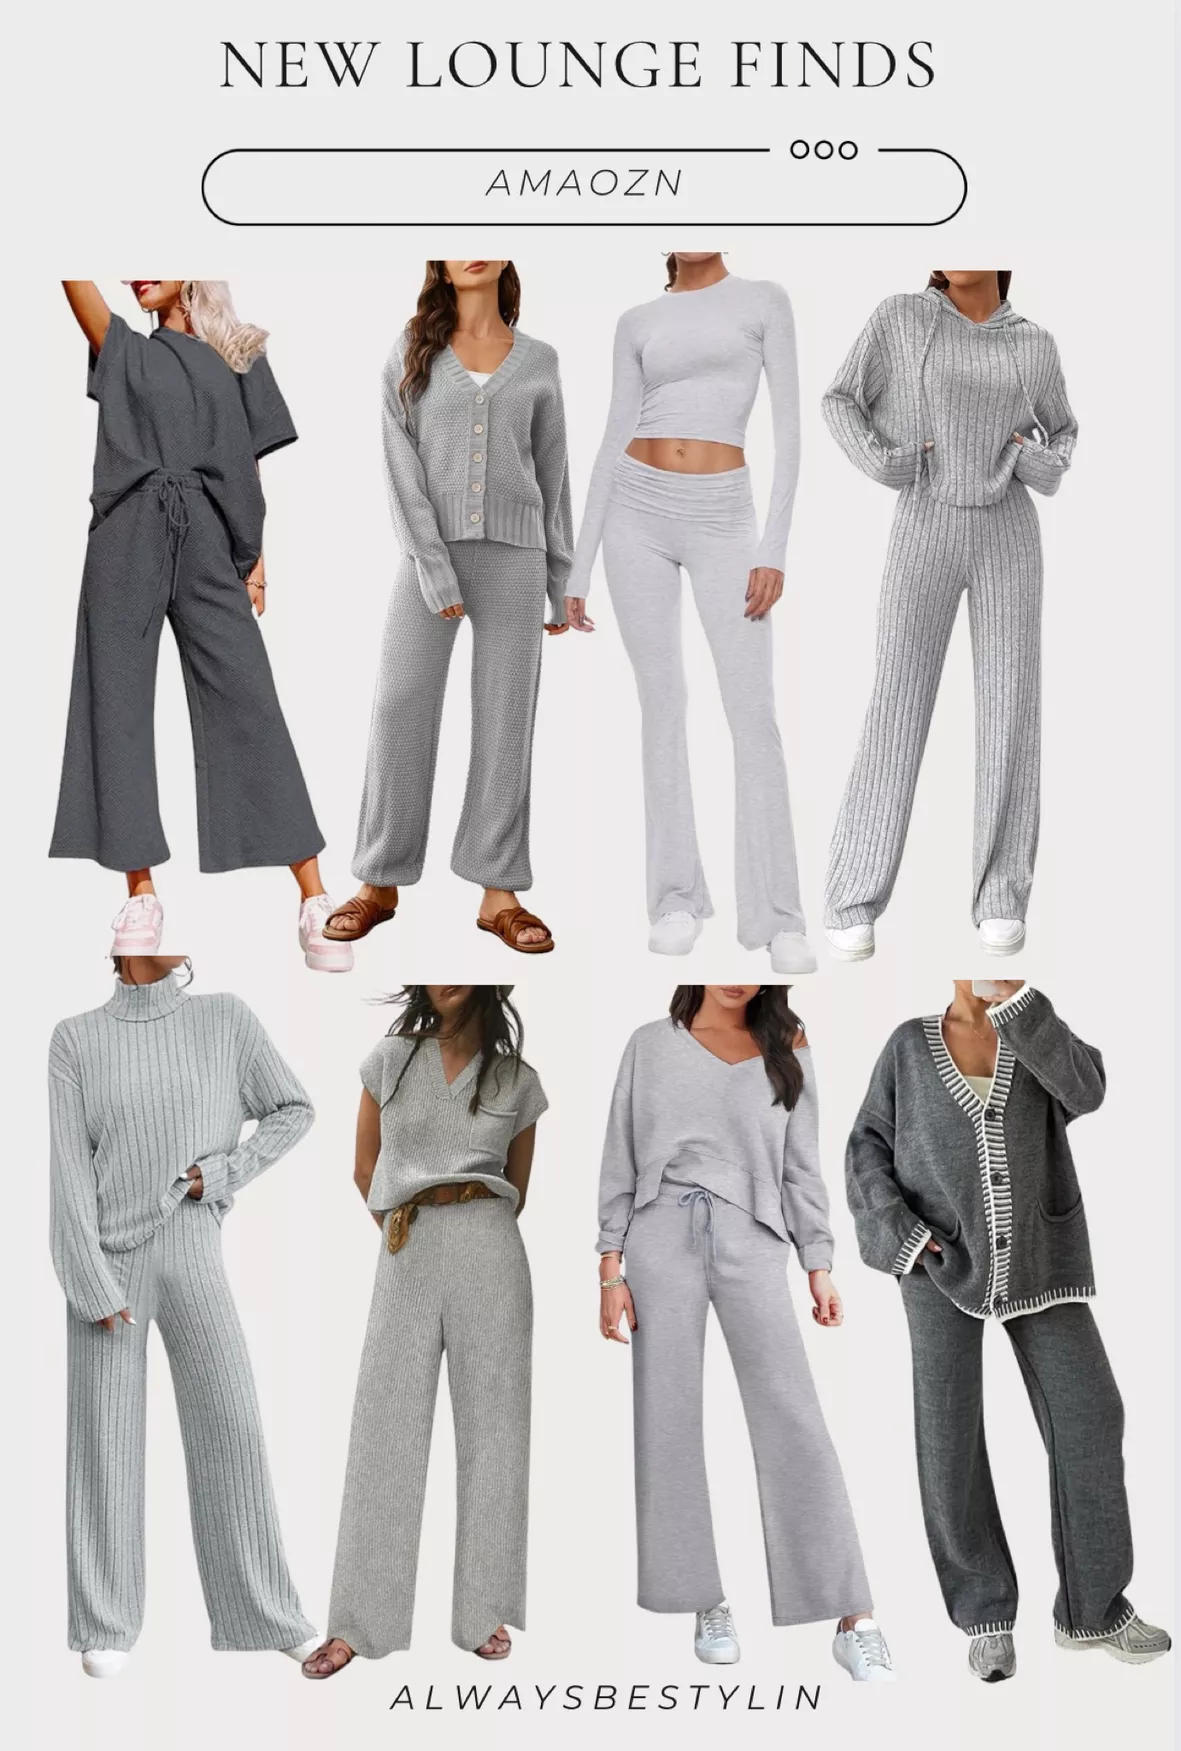  AnotherChill Womens 2 Piece Lounge Sets Fold-over Flare  Pants Set Long Sleeve Cropped Top Casual Outfits Pajamas